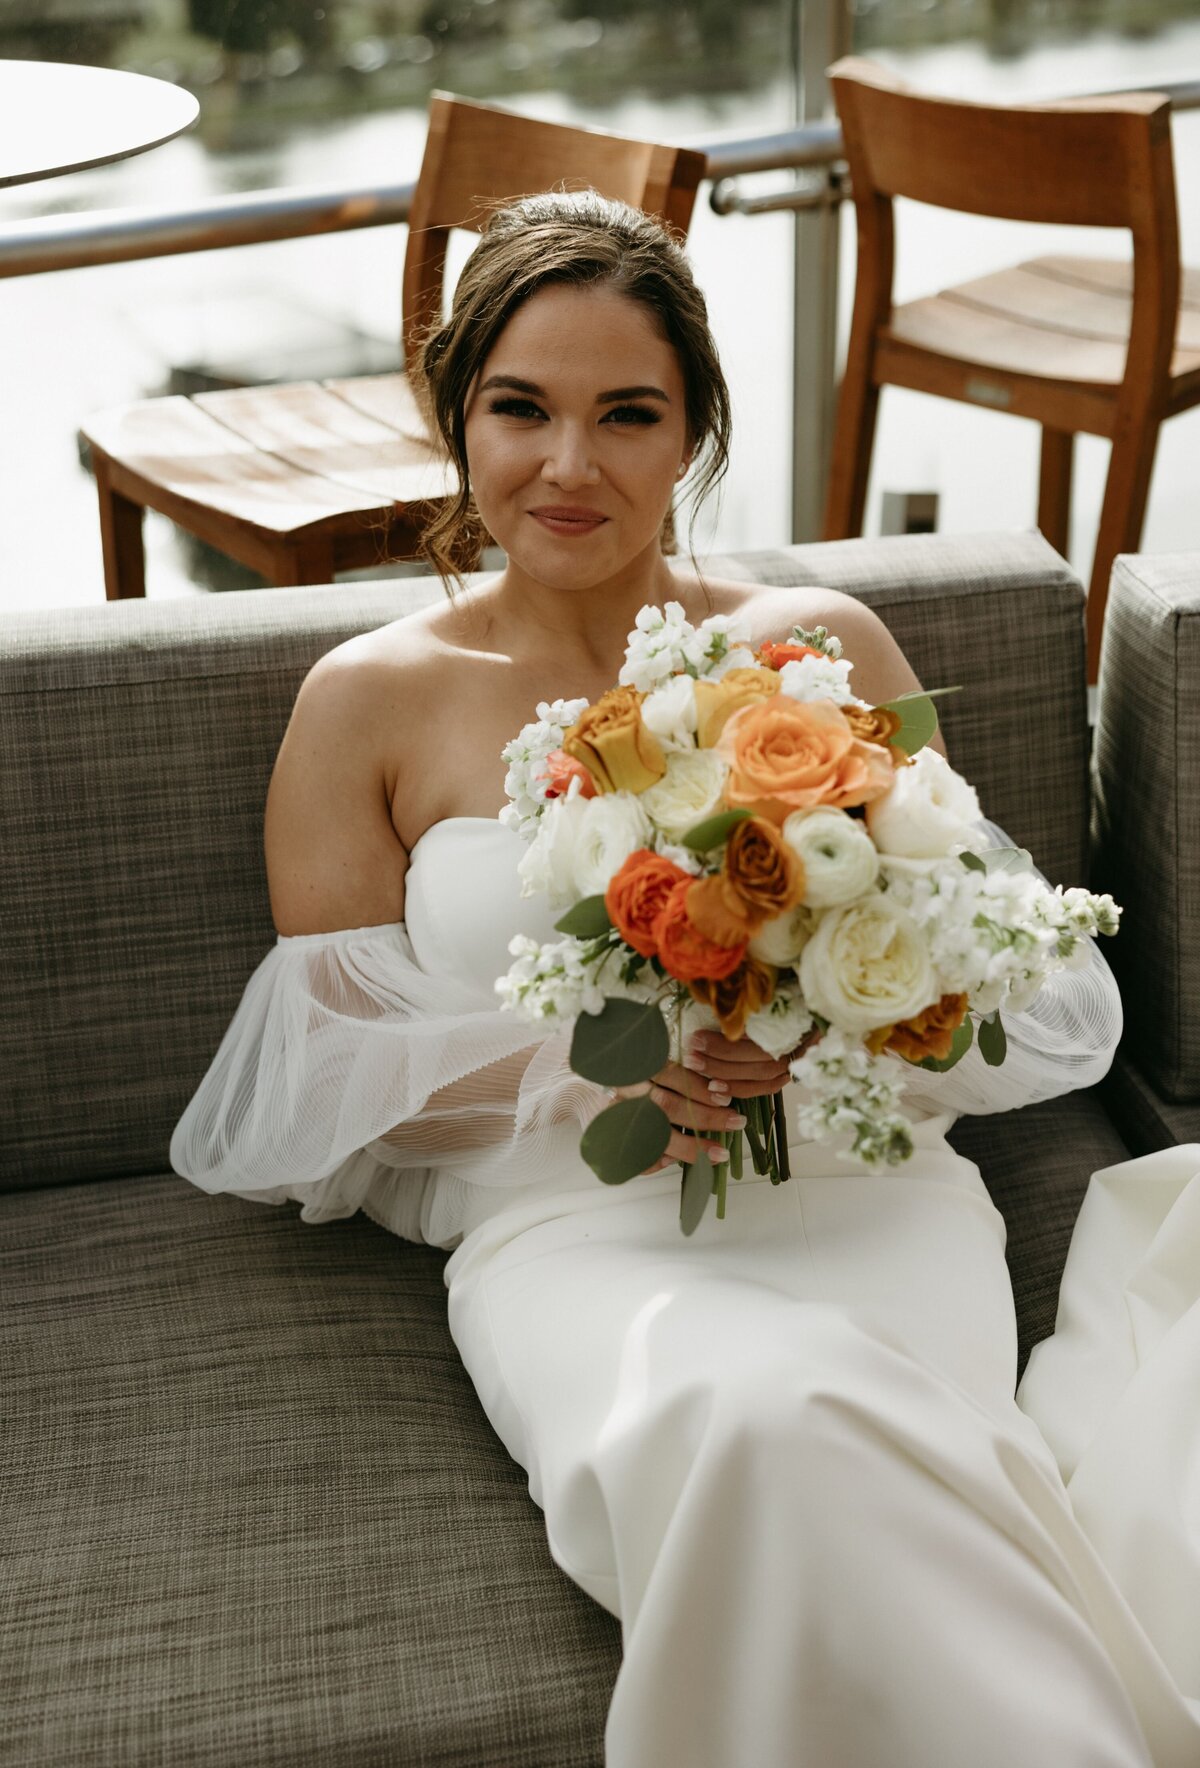 Event-Planning-DC-Washington-DC-wedding-Intercontinental-Wharf-Lexi-Truesdale-bride-bouquet-outside-seated